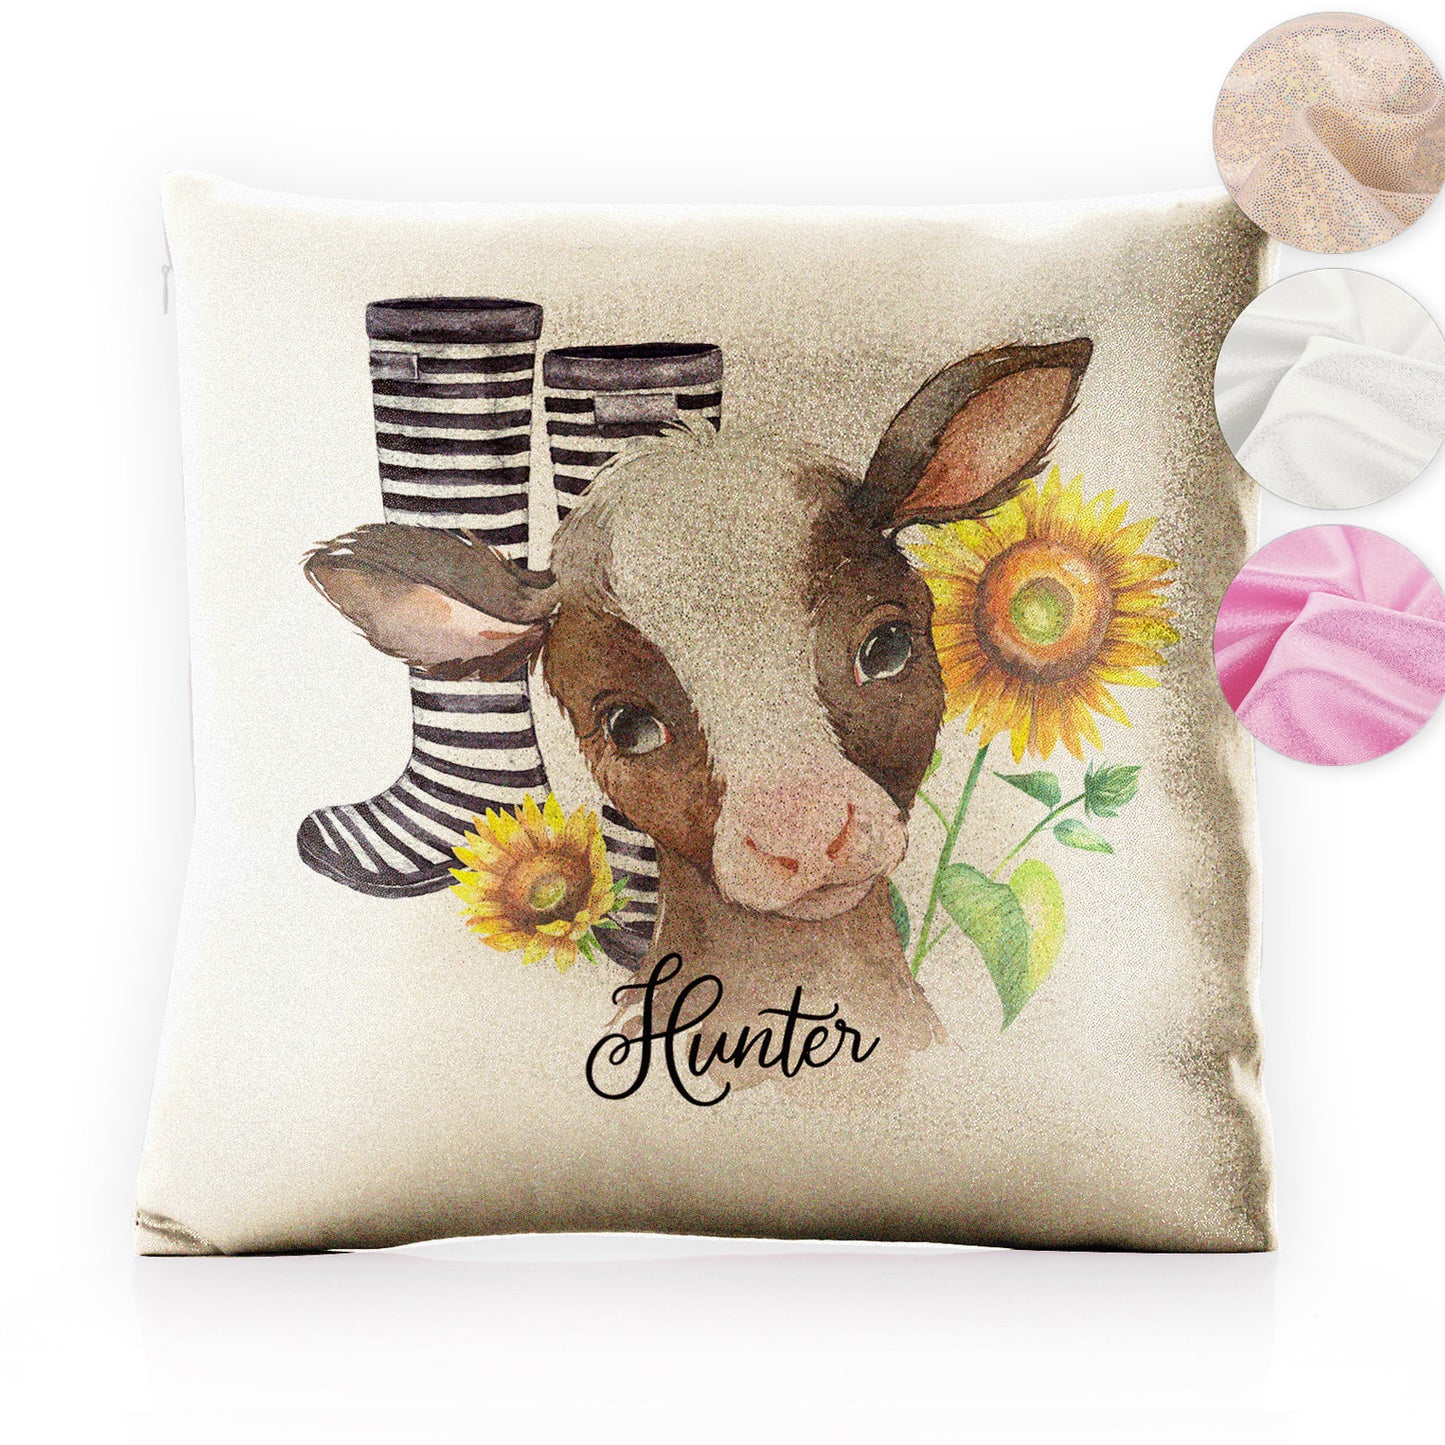 Personalised Glitter Cushion with Brown Cow Yellow Sunflowers and Cute Text